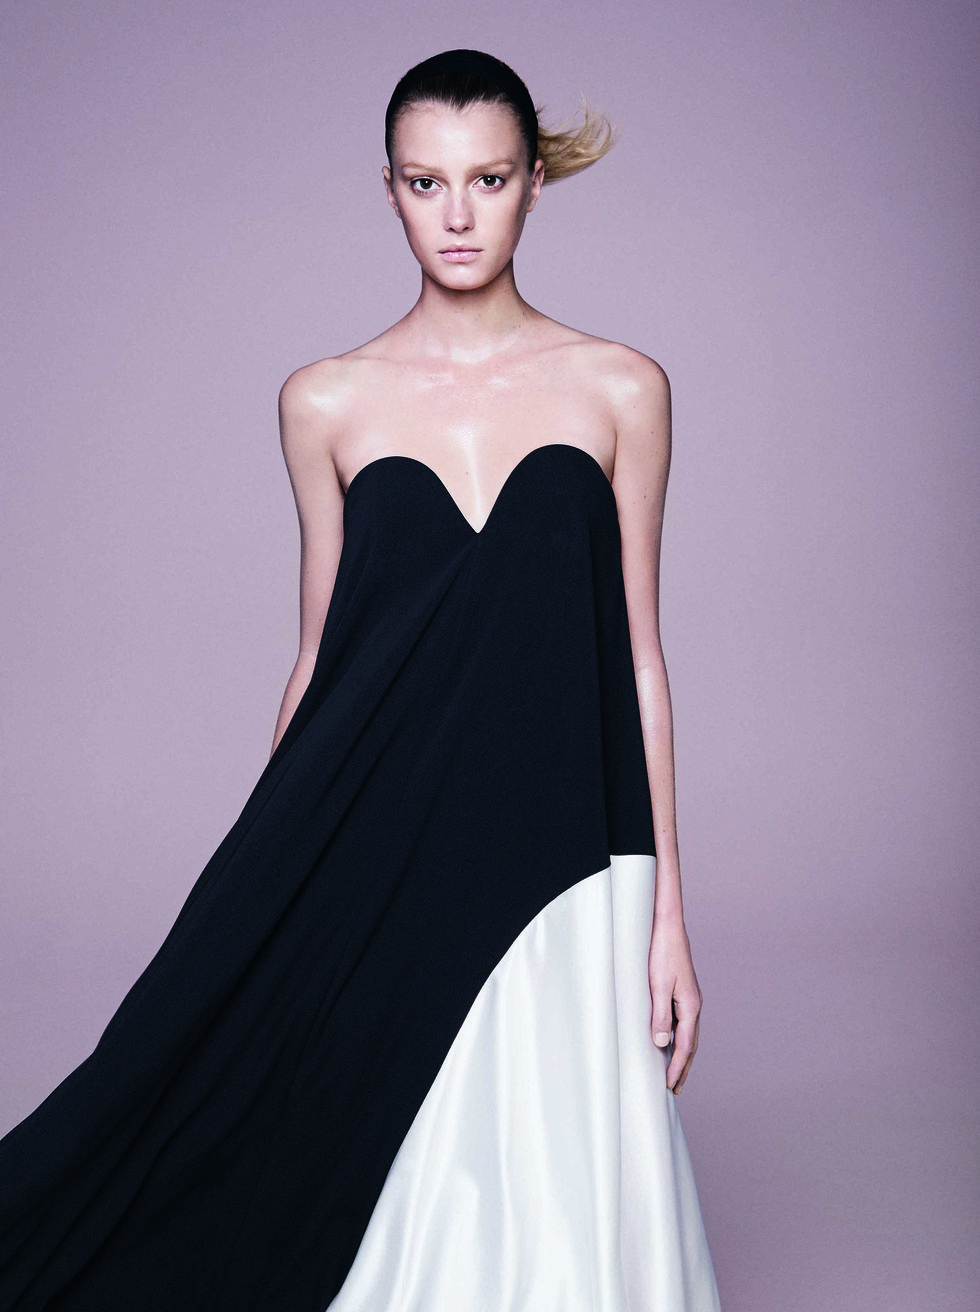 Fashion model, Dress, Clothing, Gown, Shoulder, Fashion, Haute couture, Strapless dress, Bridal party dress, Formal wear, 